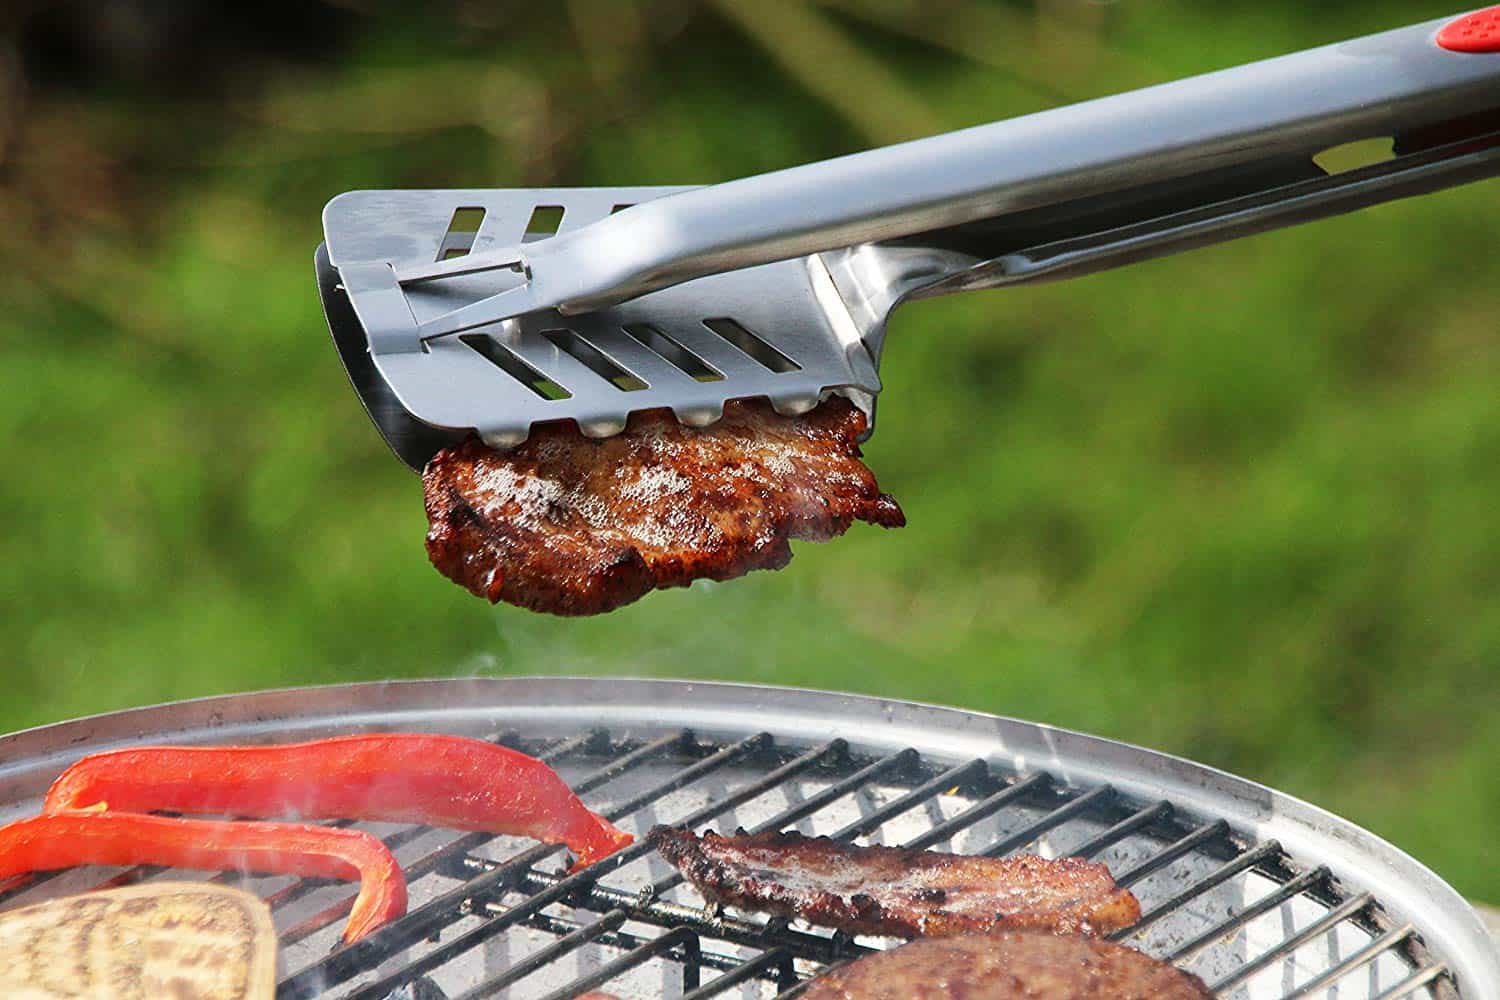 Stingray multifunctional barbecue tool